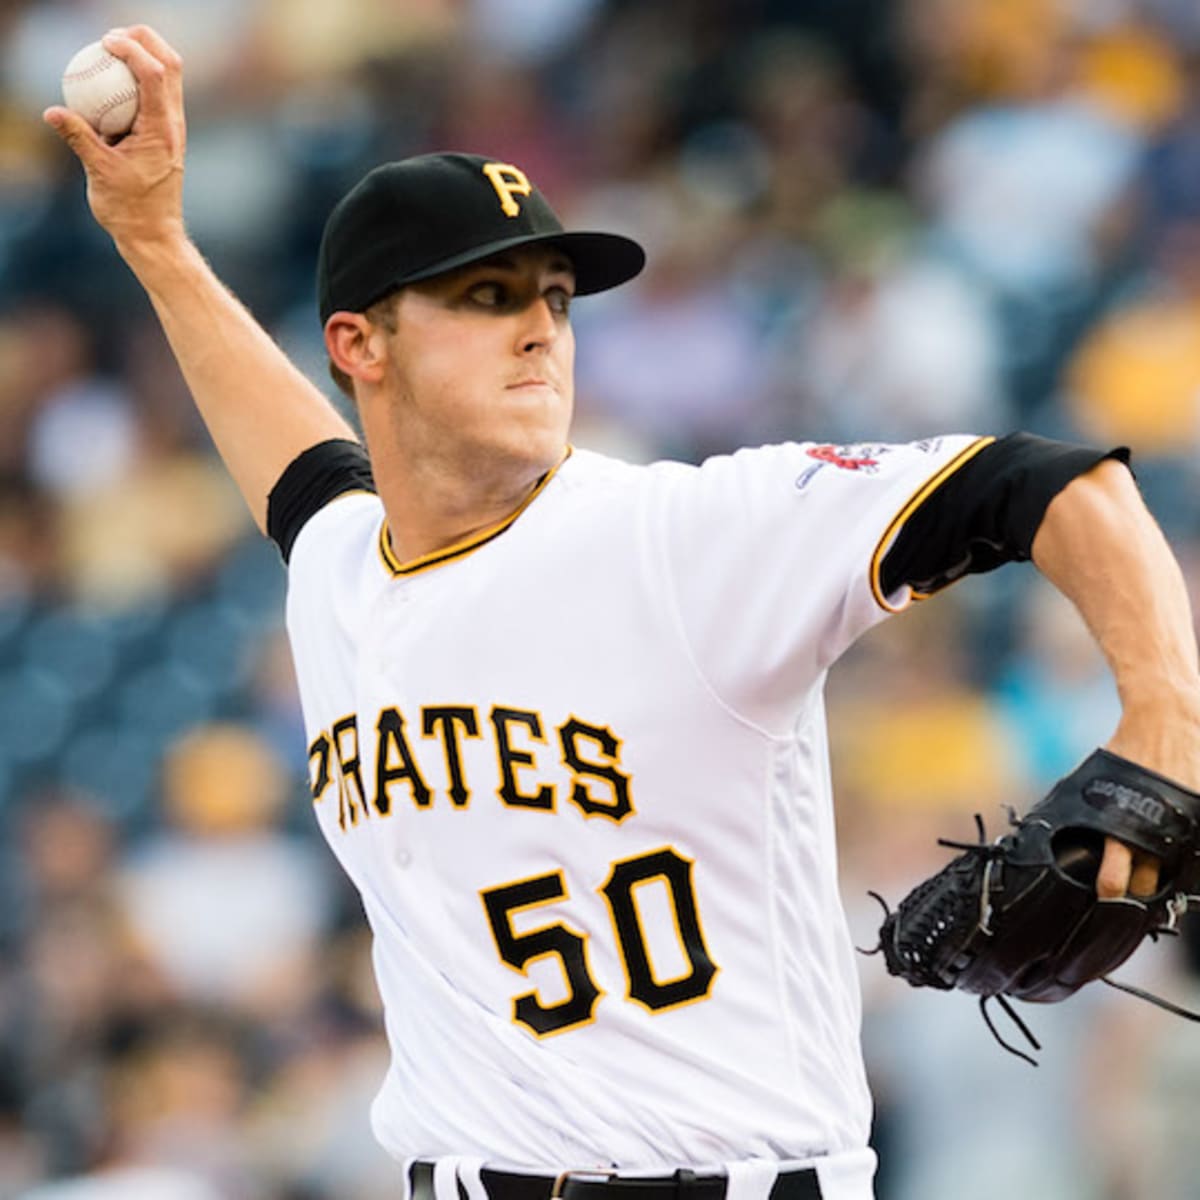 Jameson Taillon New York Yankees hit by line drive